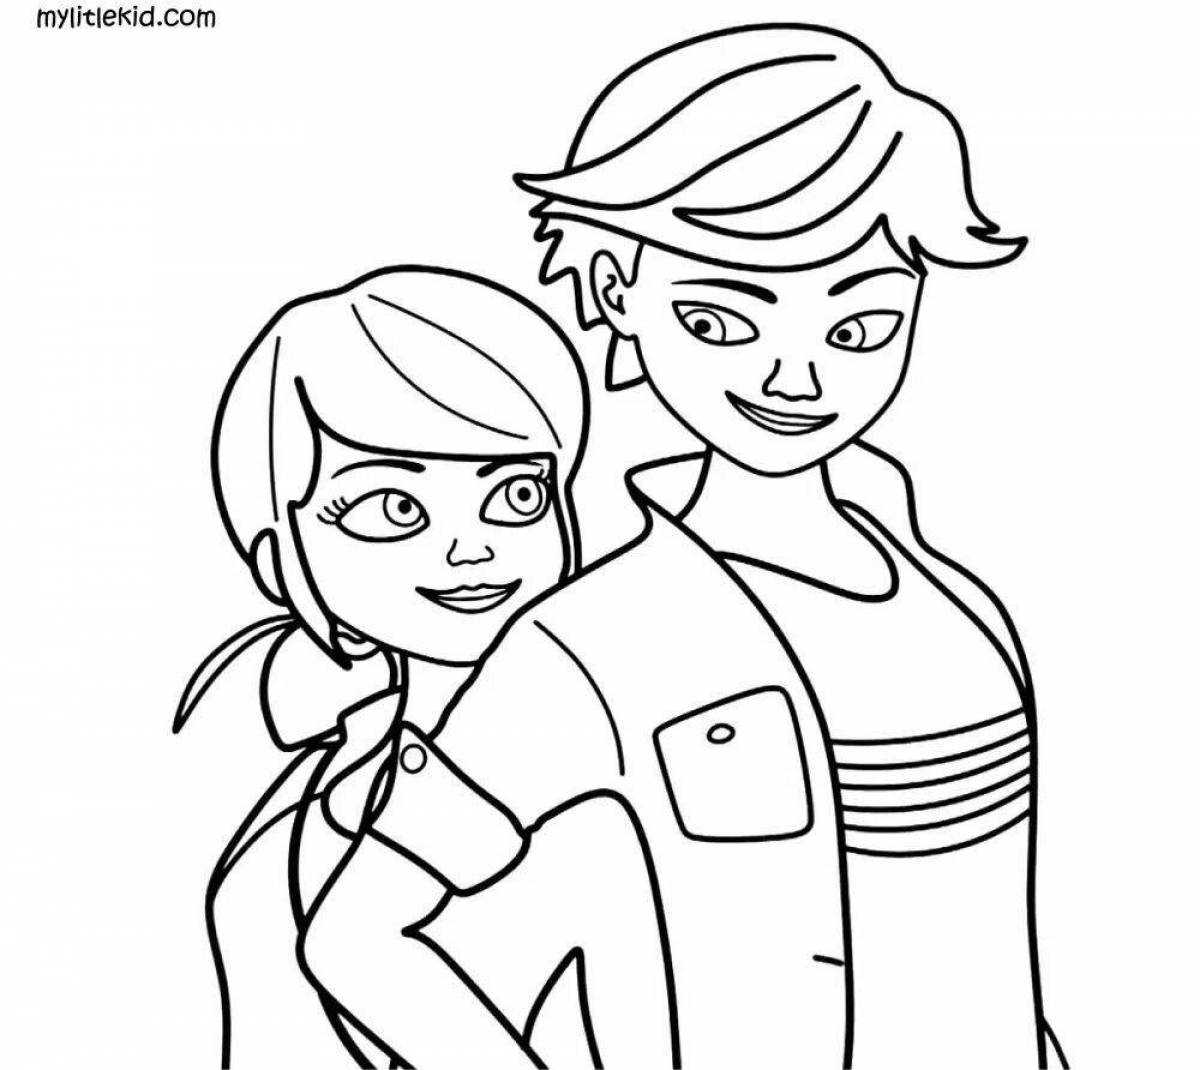 Glowing chloe coloring page